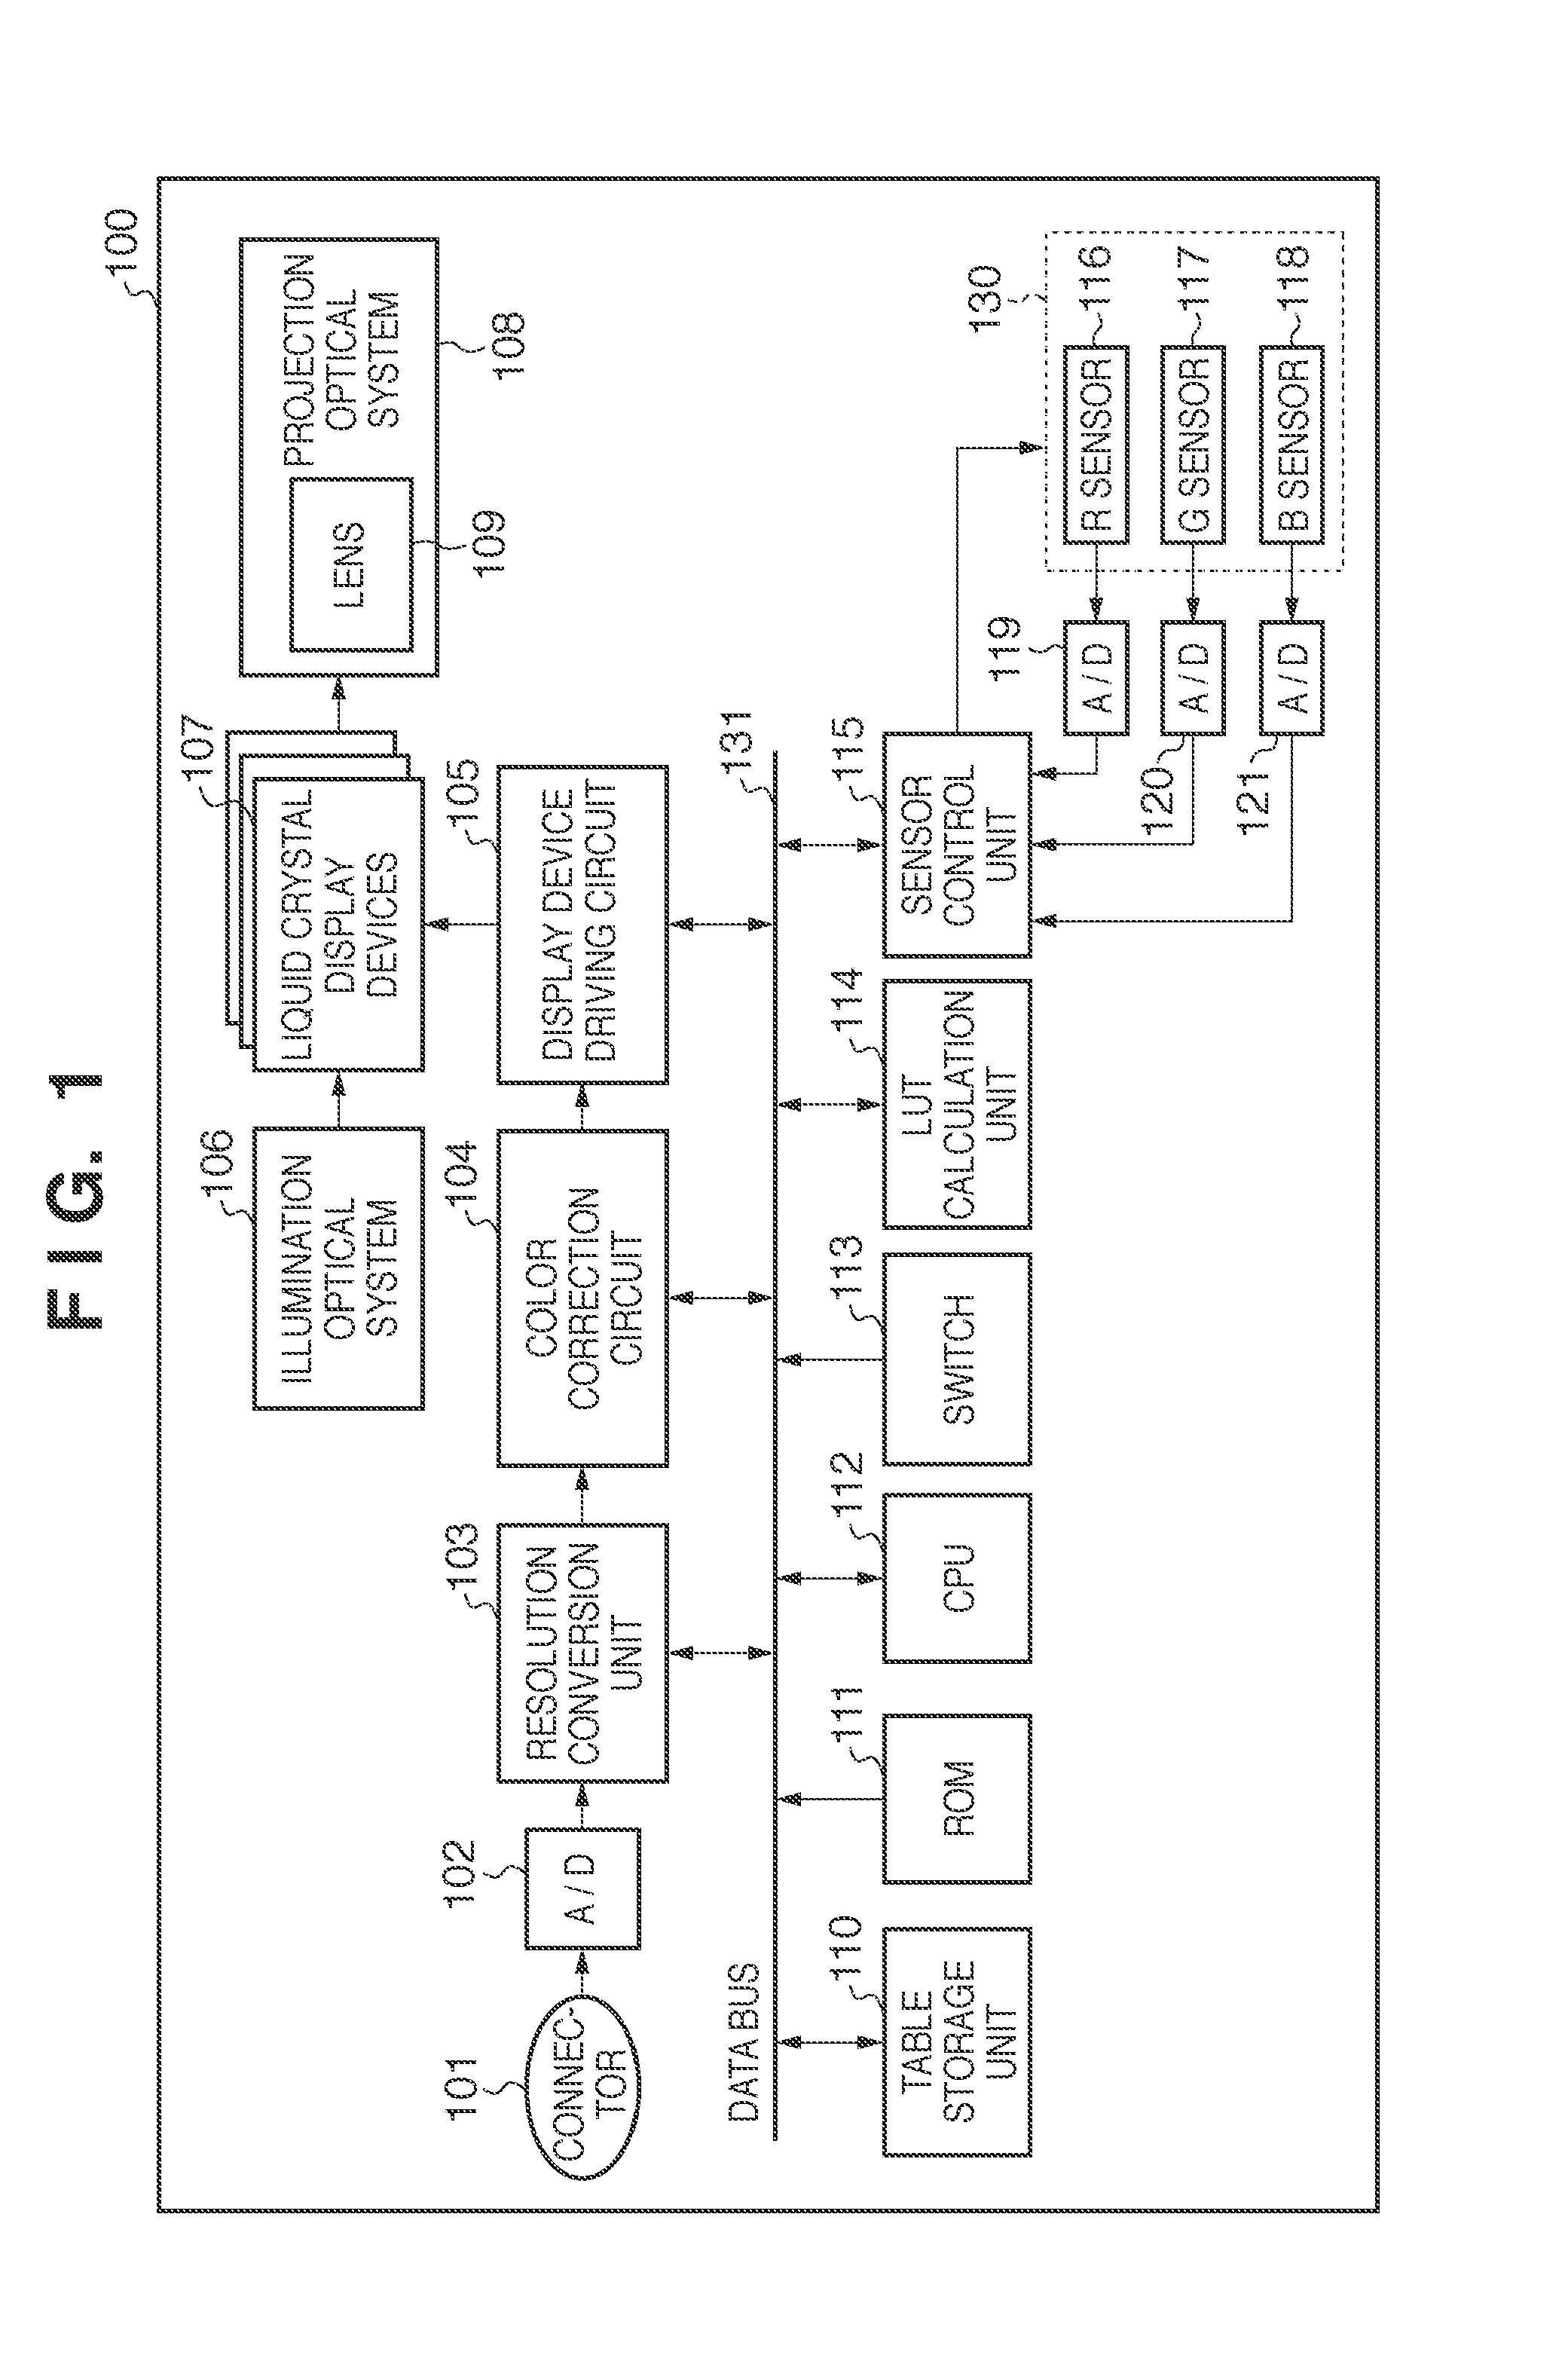 Image projection apparatus and method of controlling the same